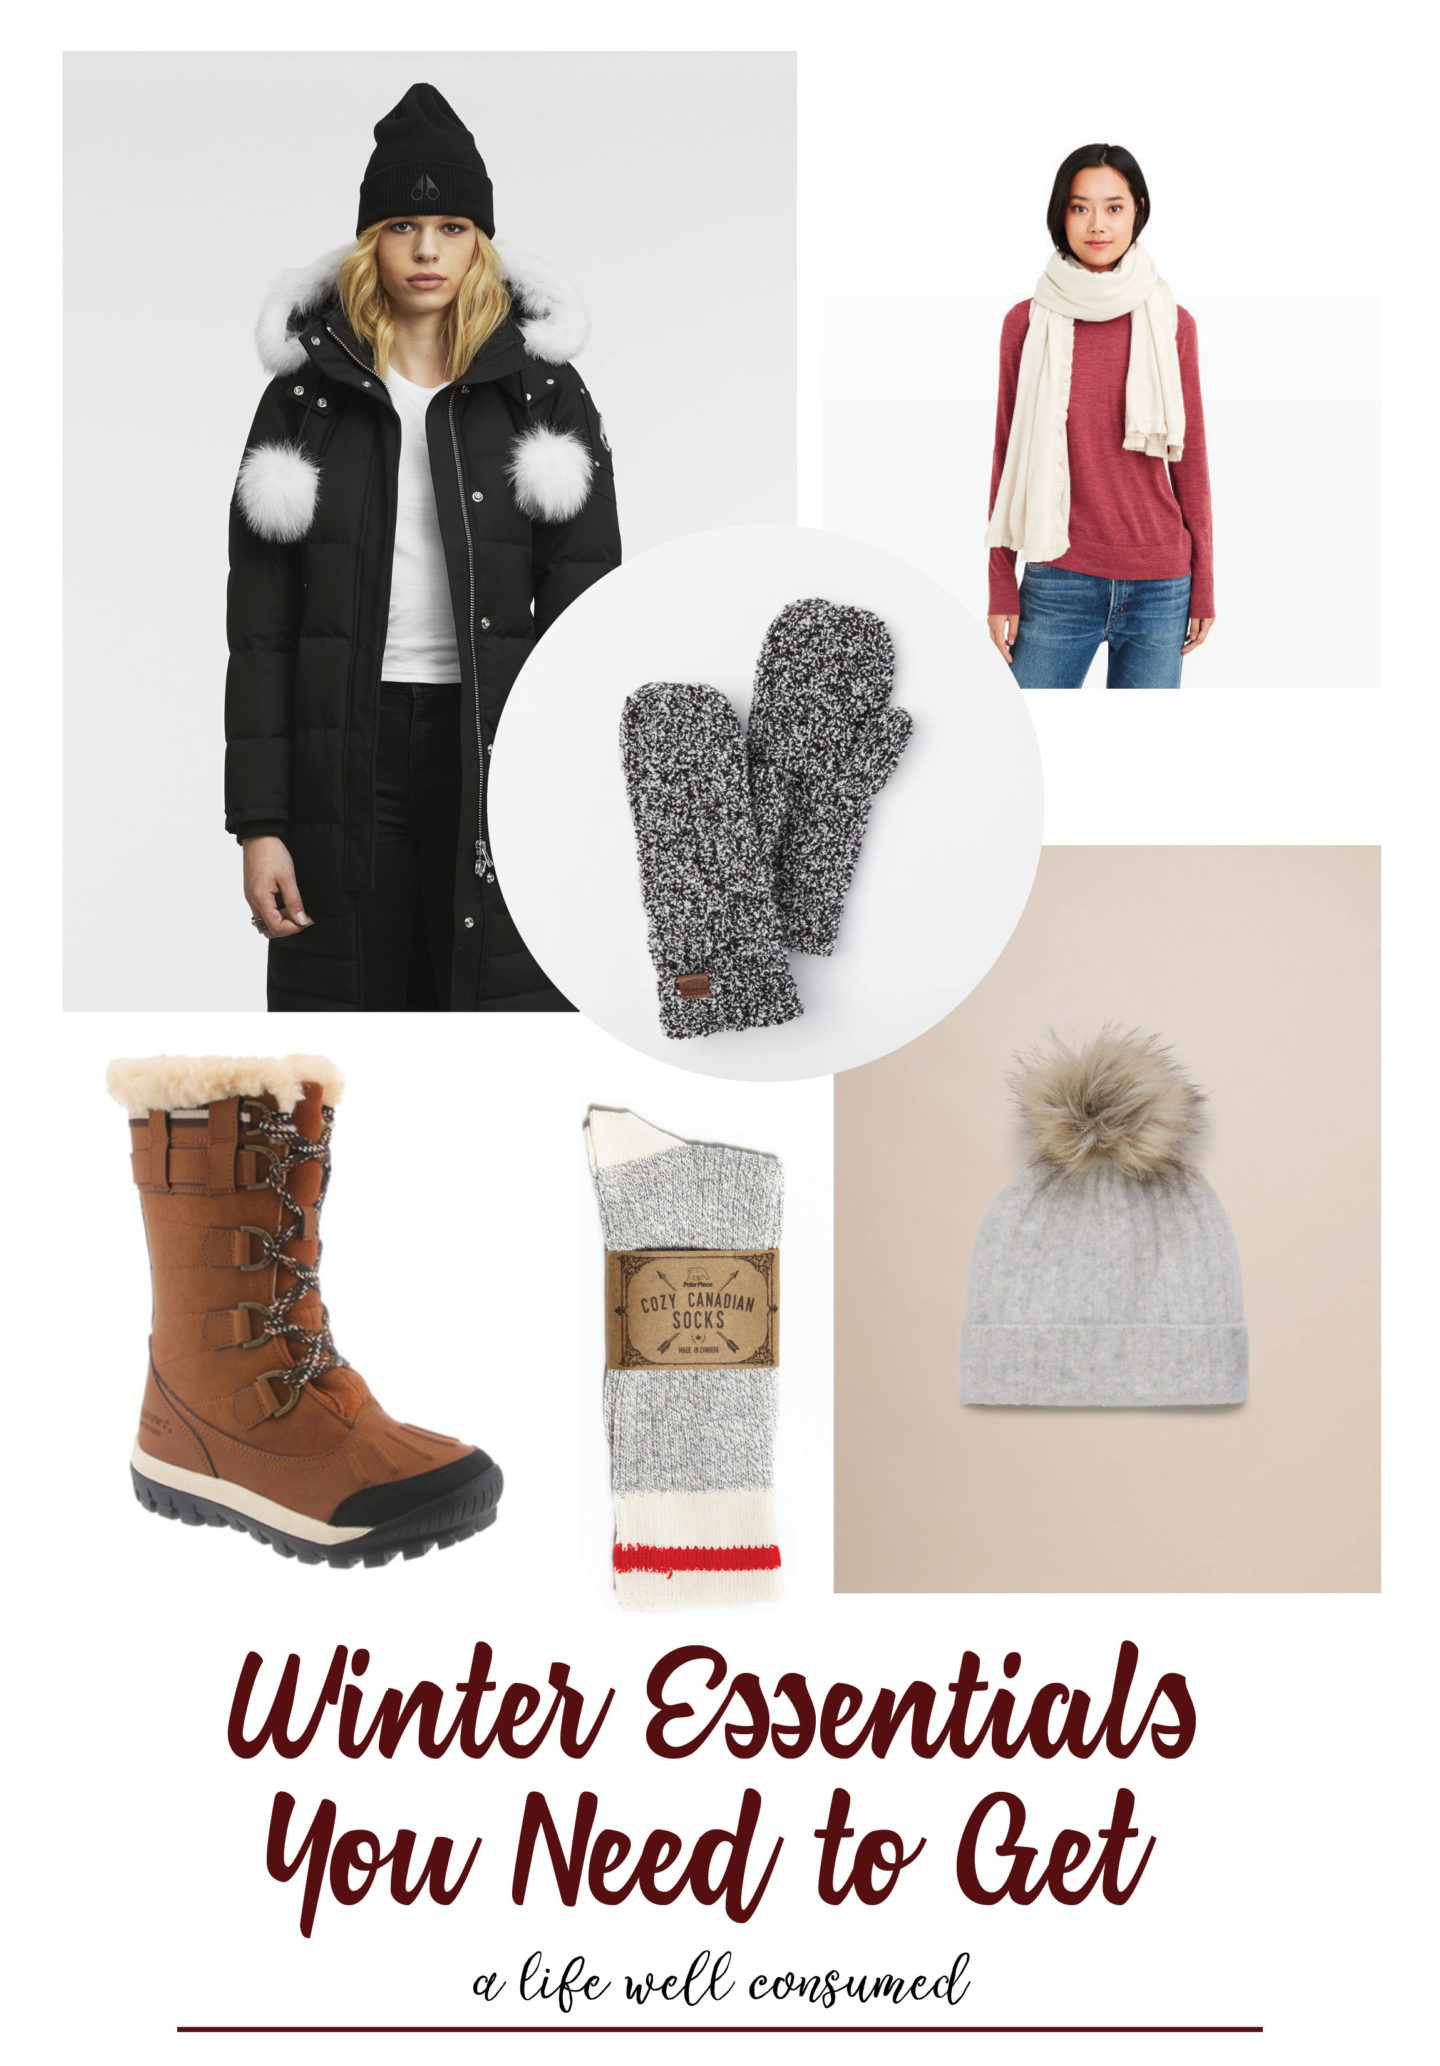 Winter Essentials You Need to Get